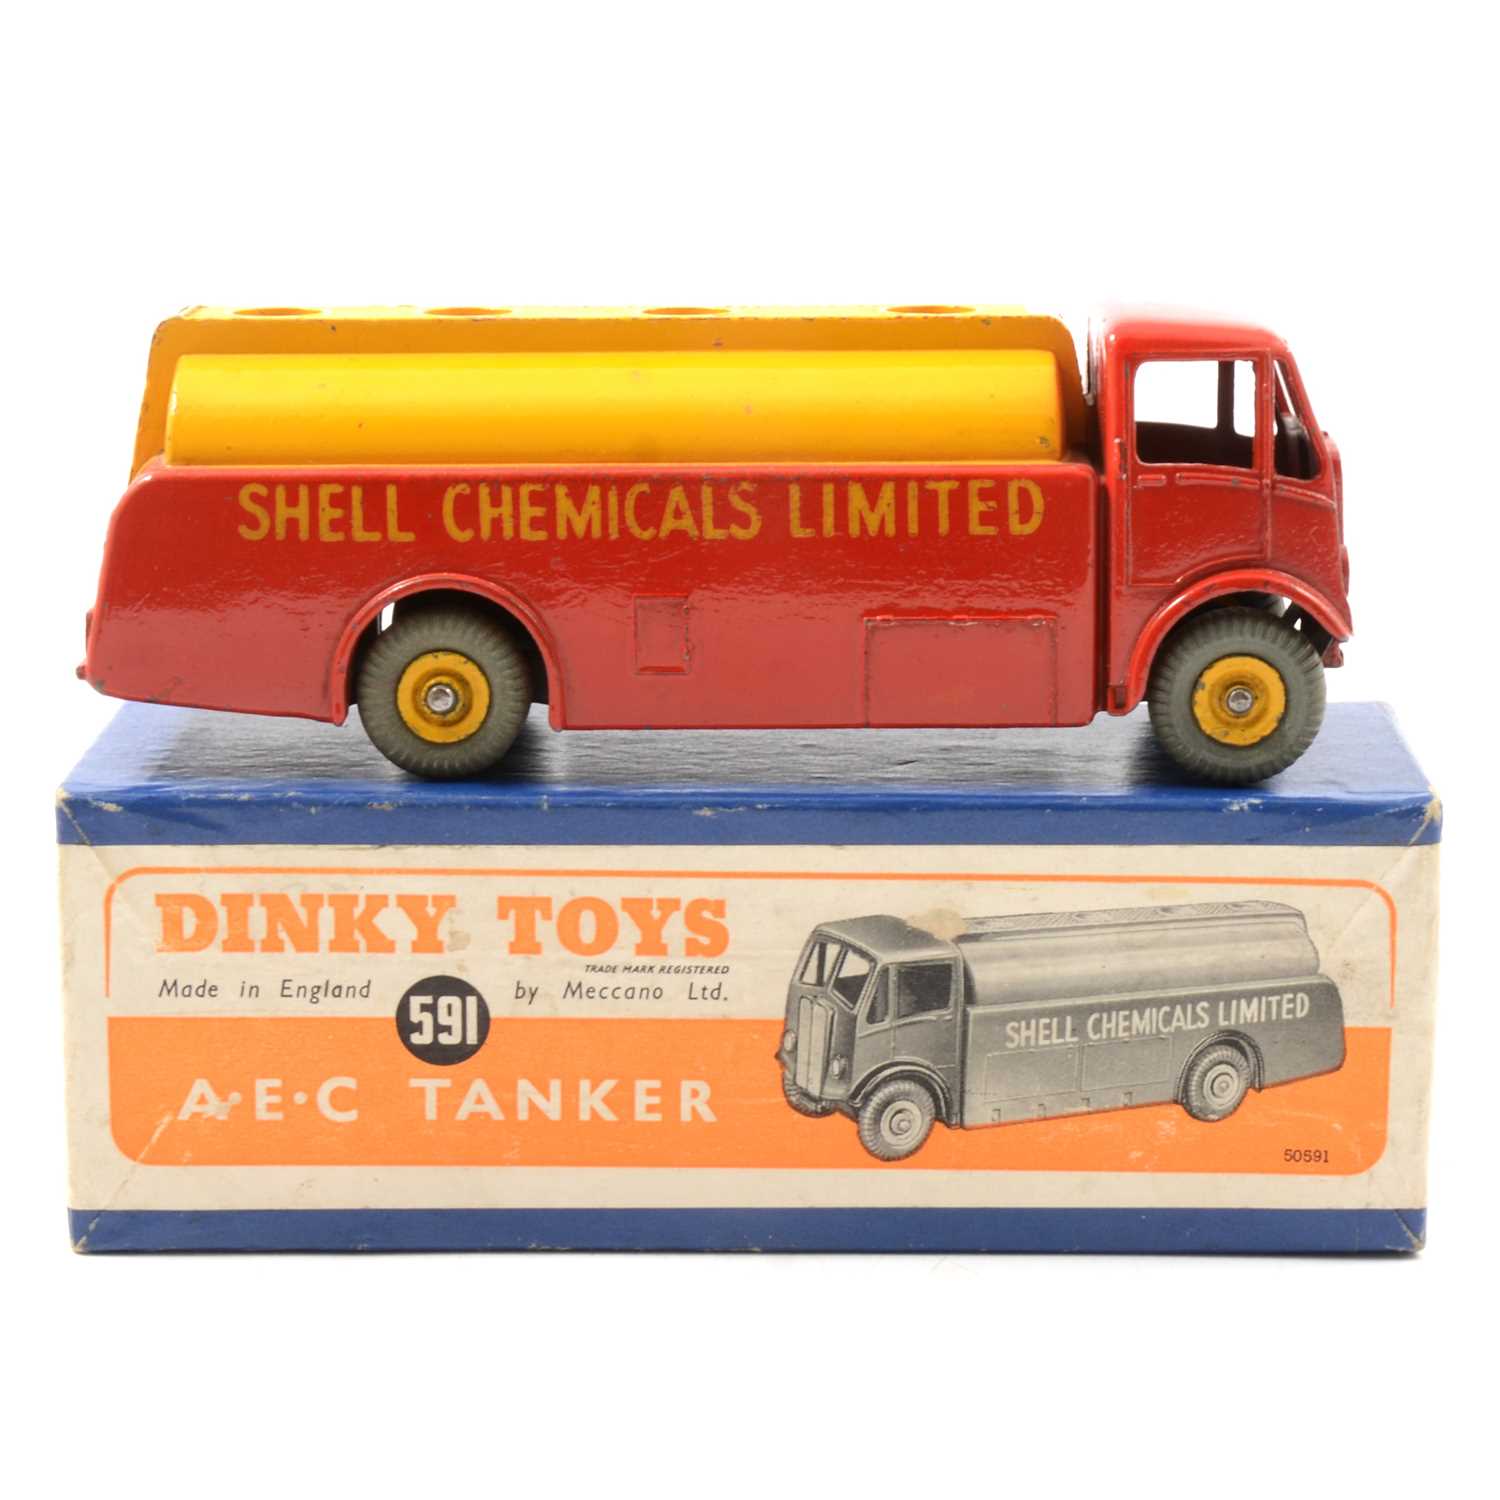 Lot 275 - Dinky Toys die-cast model 591 AEC tanker 'Shell Chemicals Limited', boxed.